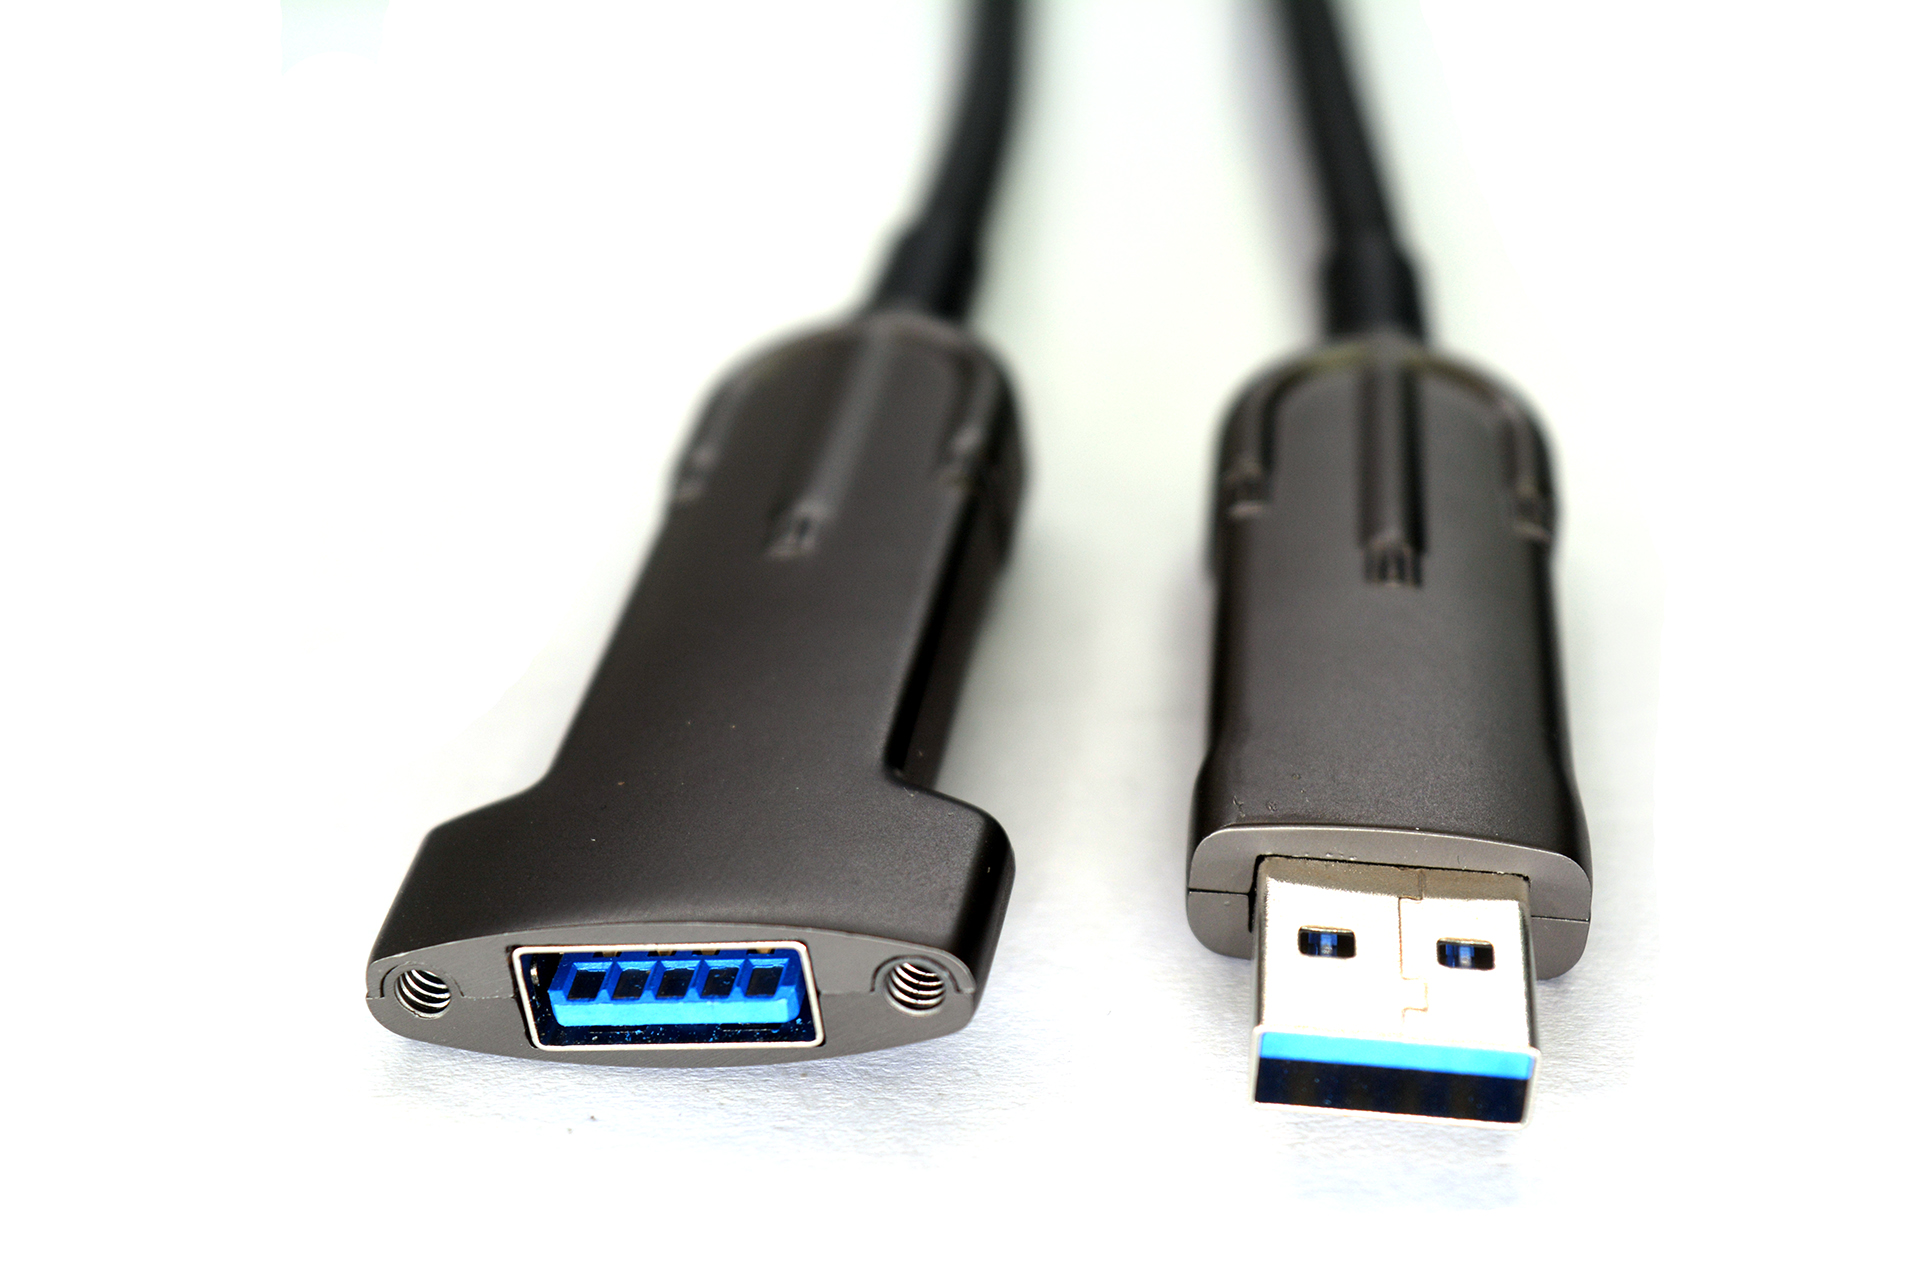 USB3 AOC extension cable with locking screw